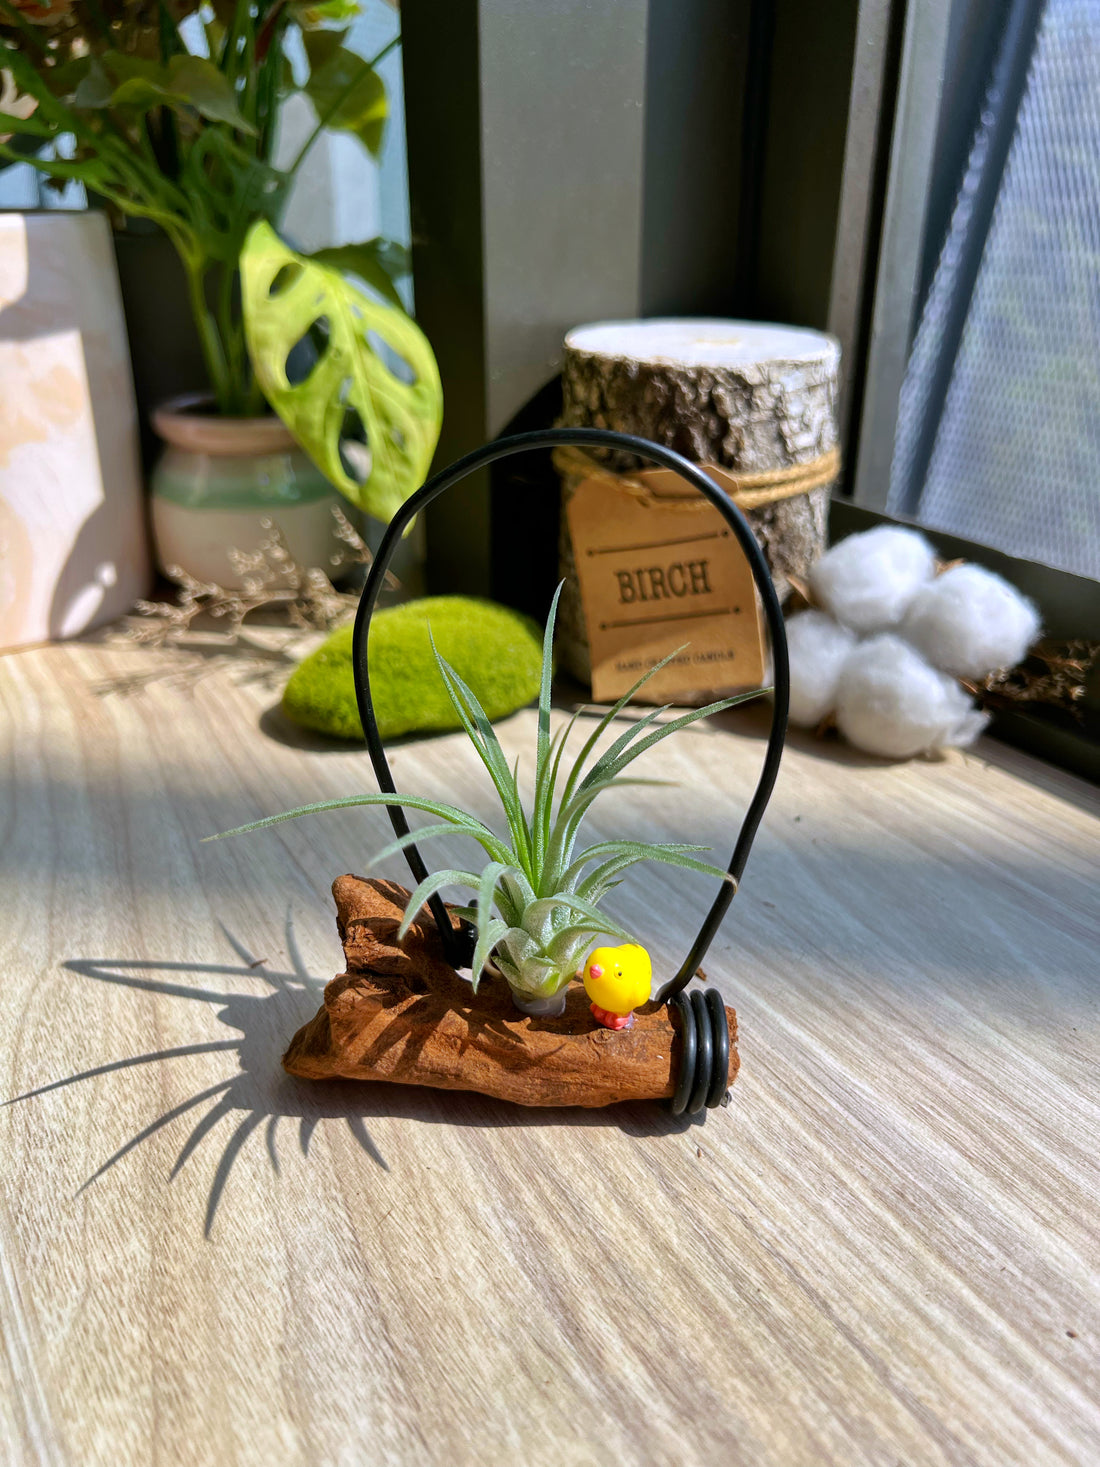 How to water air plant attached to wood or decorative support